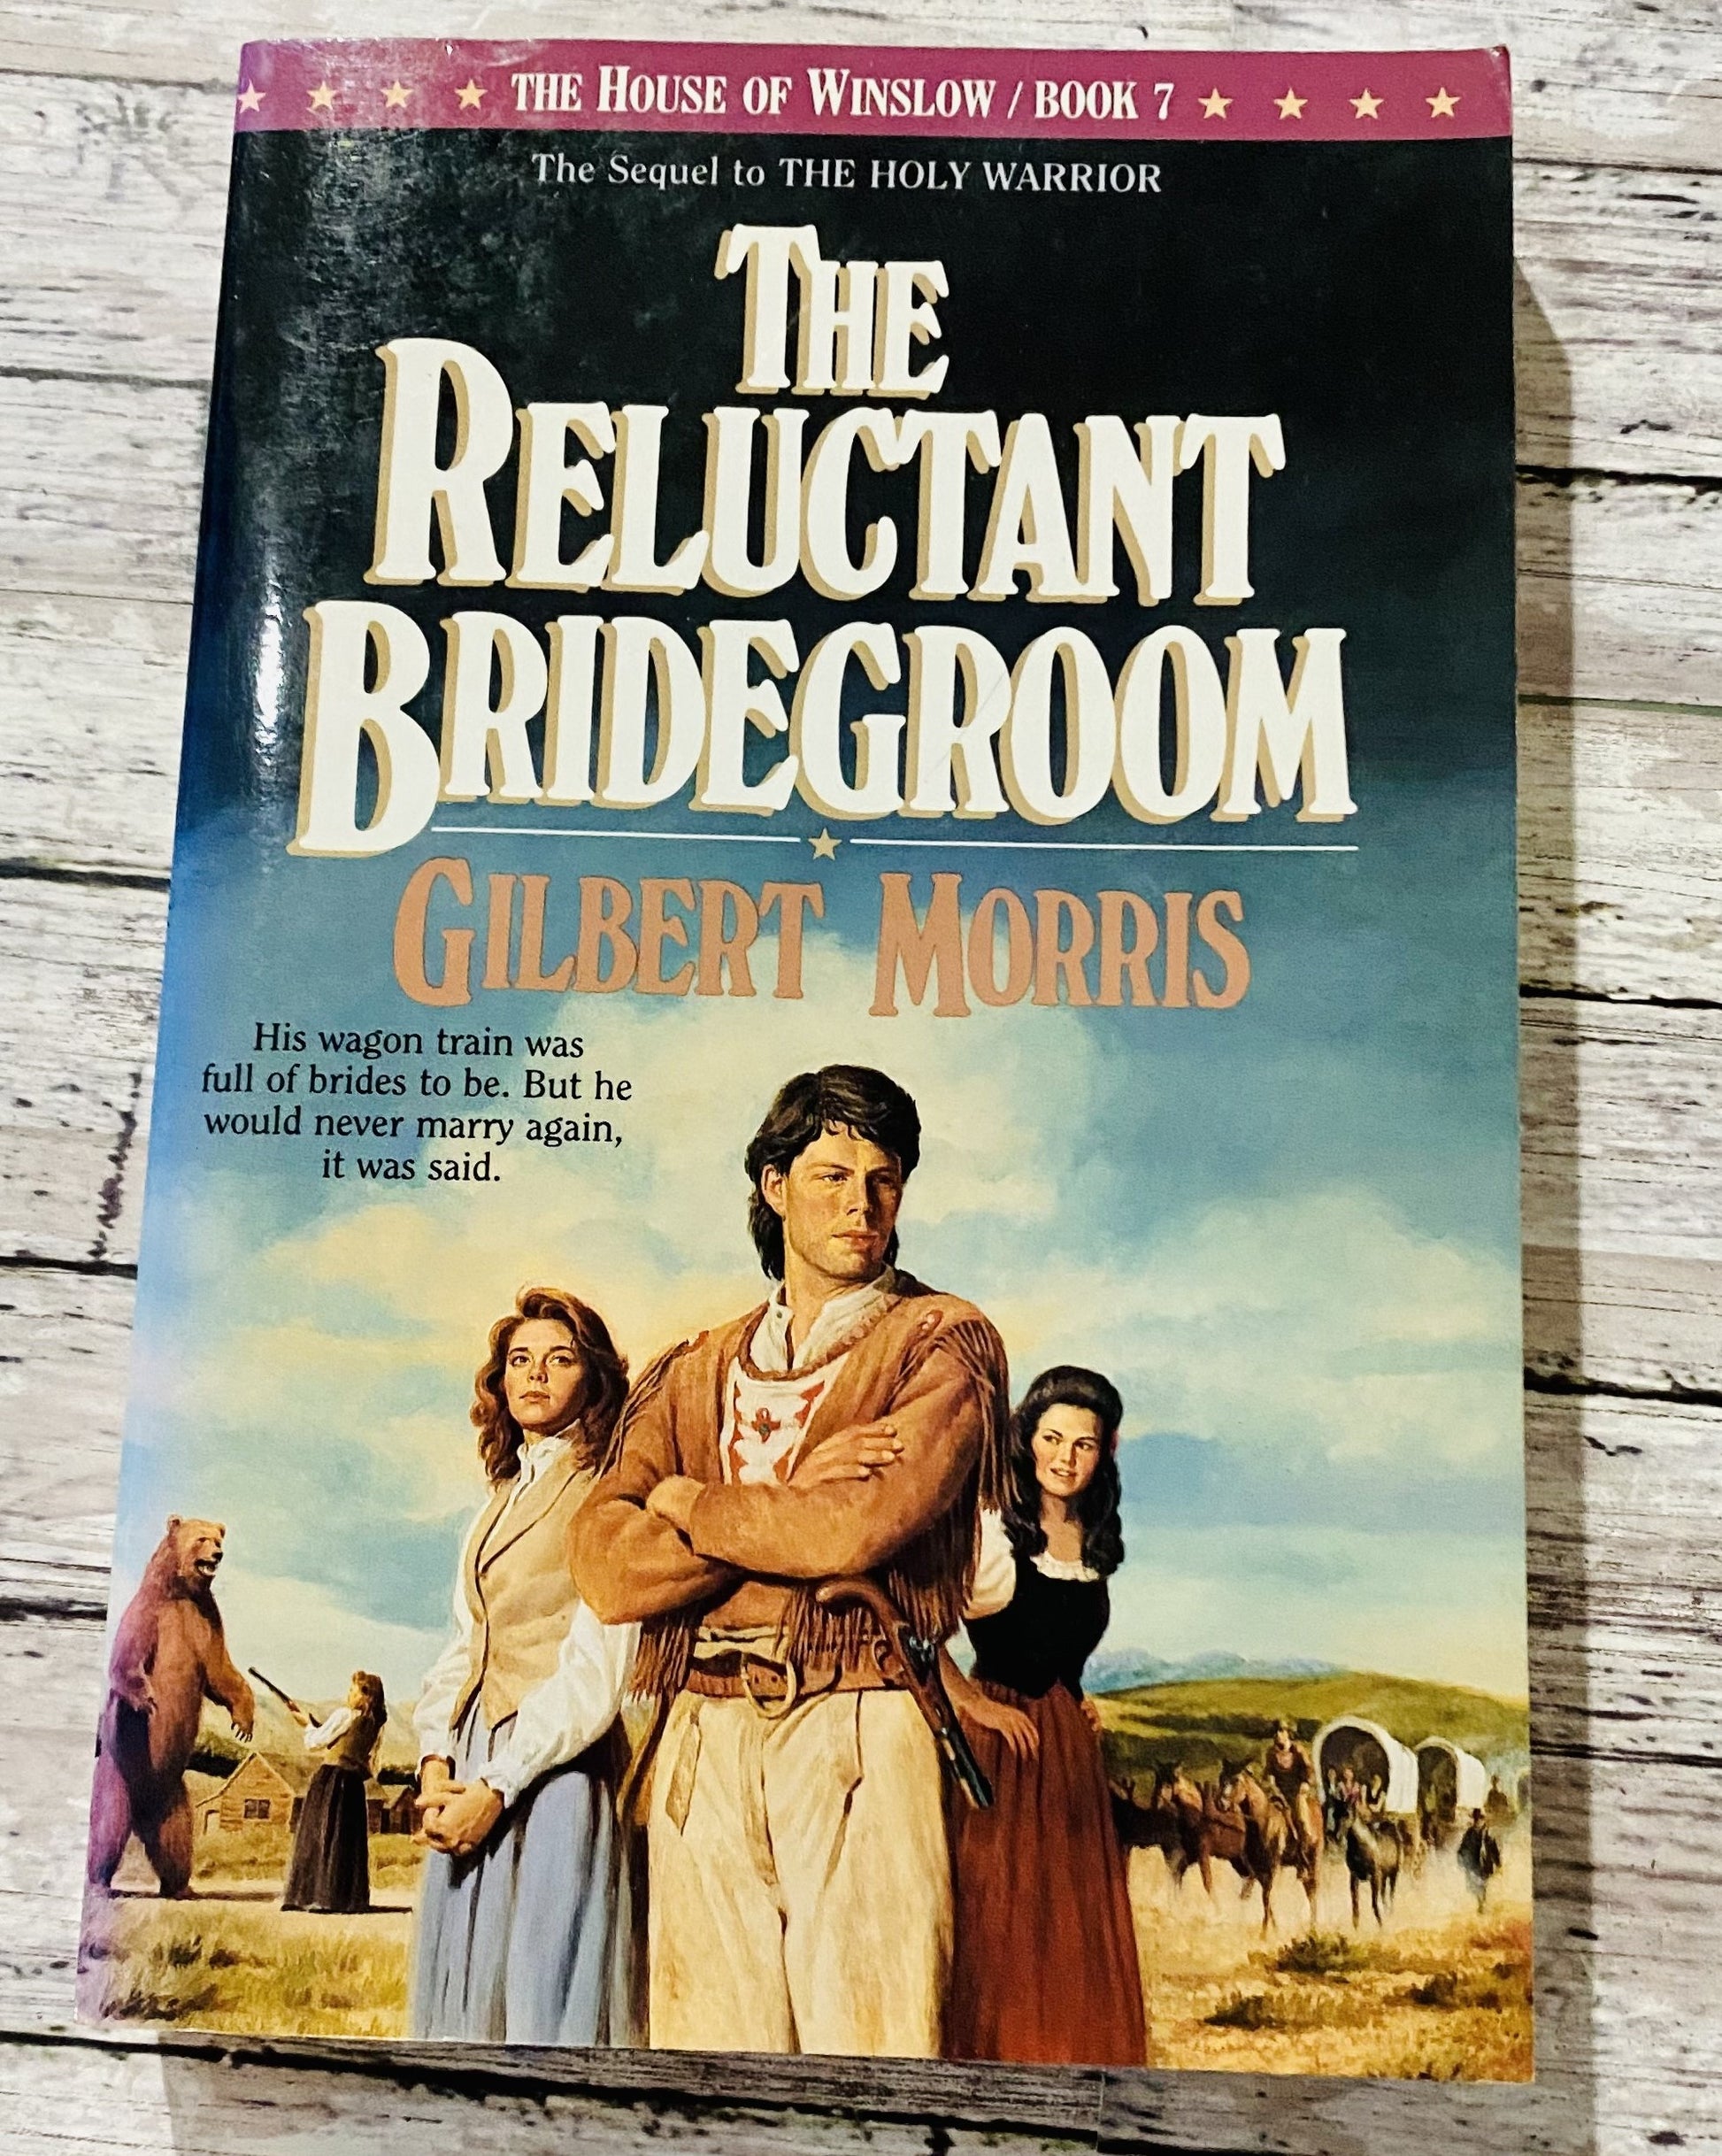 The House of Winslow Series: The Reluctant Bridegroom (Book 7)* - Anchored Homeschool Resource Center